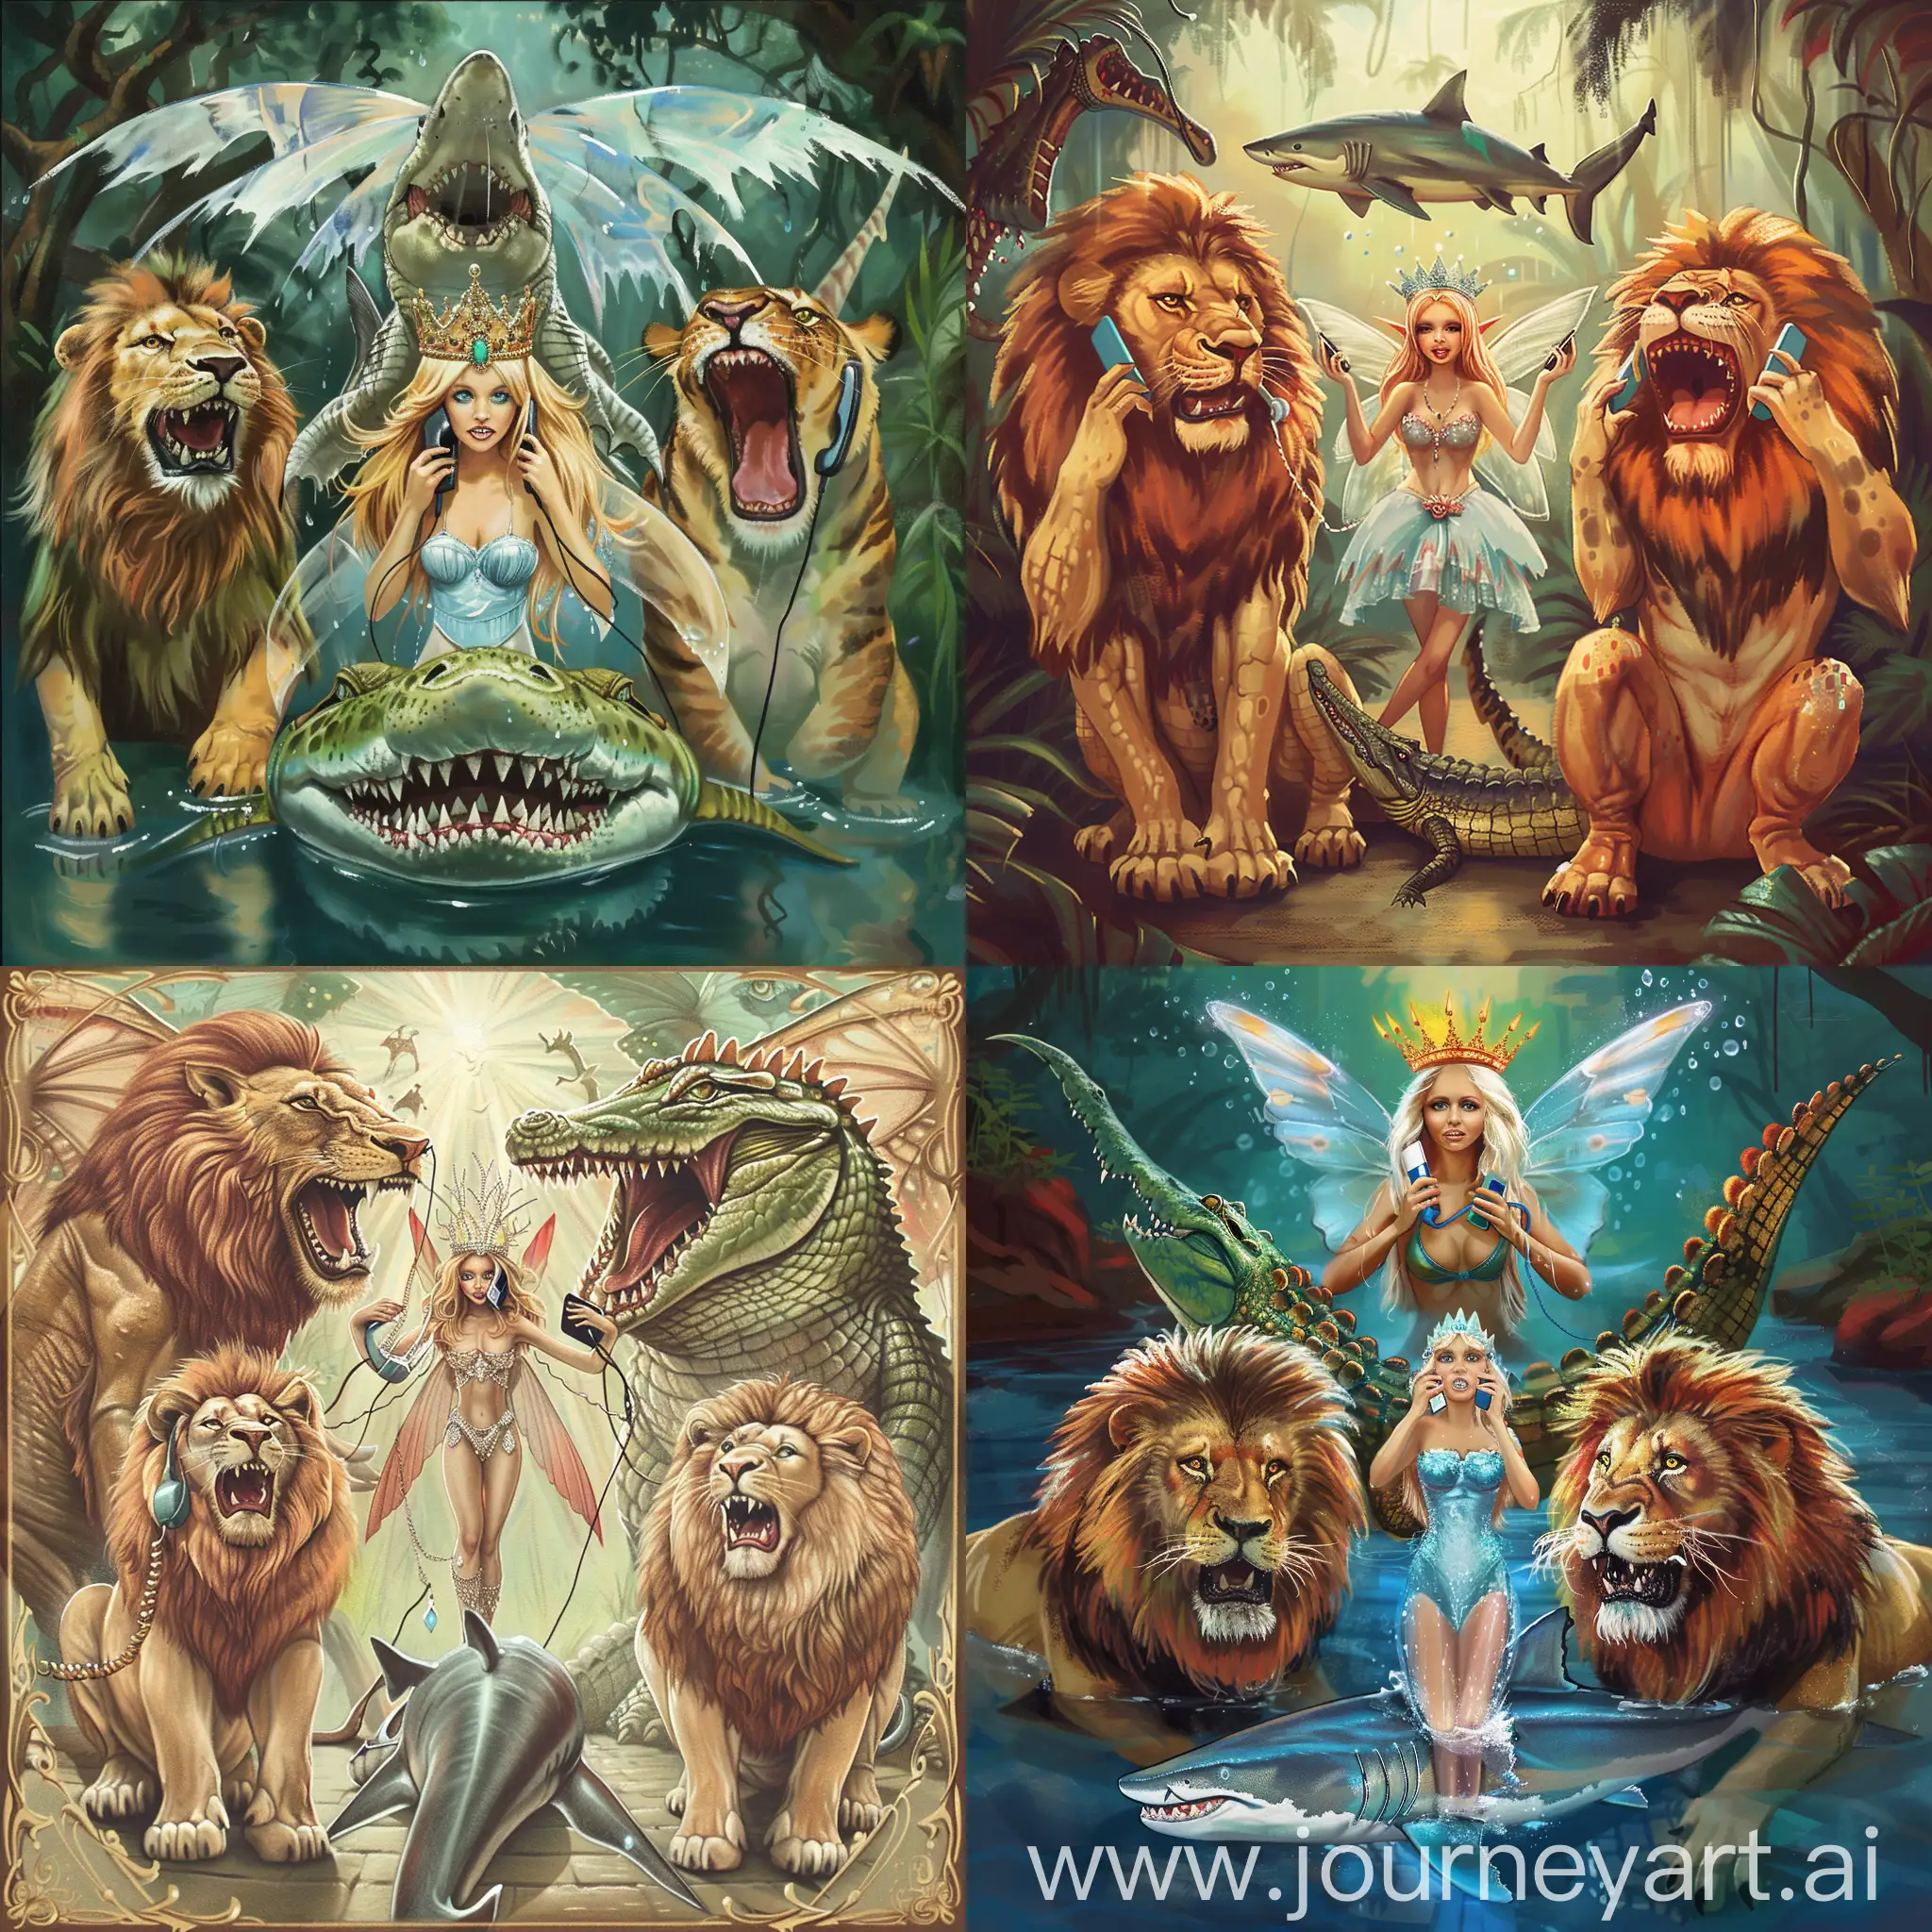 I want a picture that show 3 fierce animals, a lion a crocodile and a shark, each animal is speaking on a phone, and in the center of them, is a pretty fairy queen, and she is also speaking on a cellphone